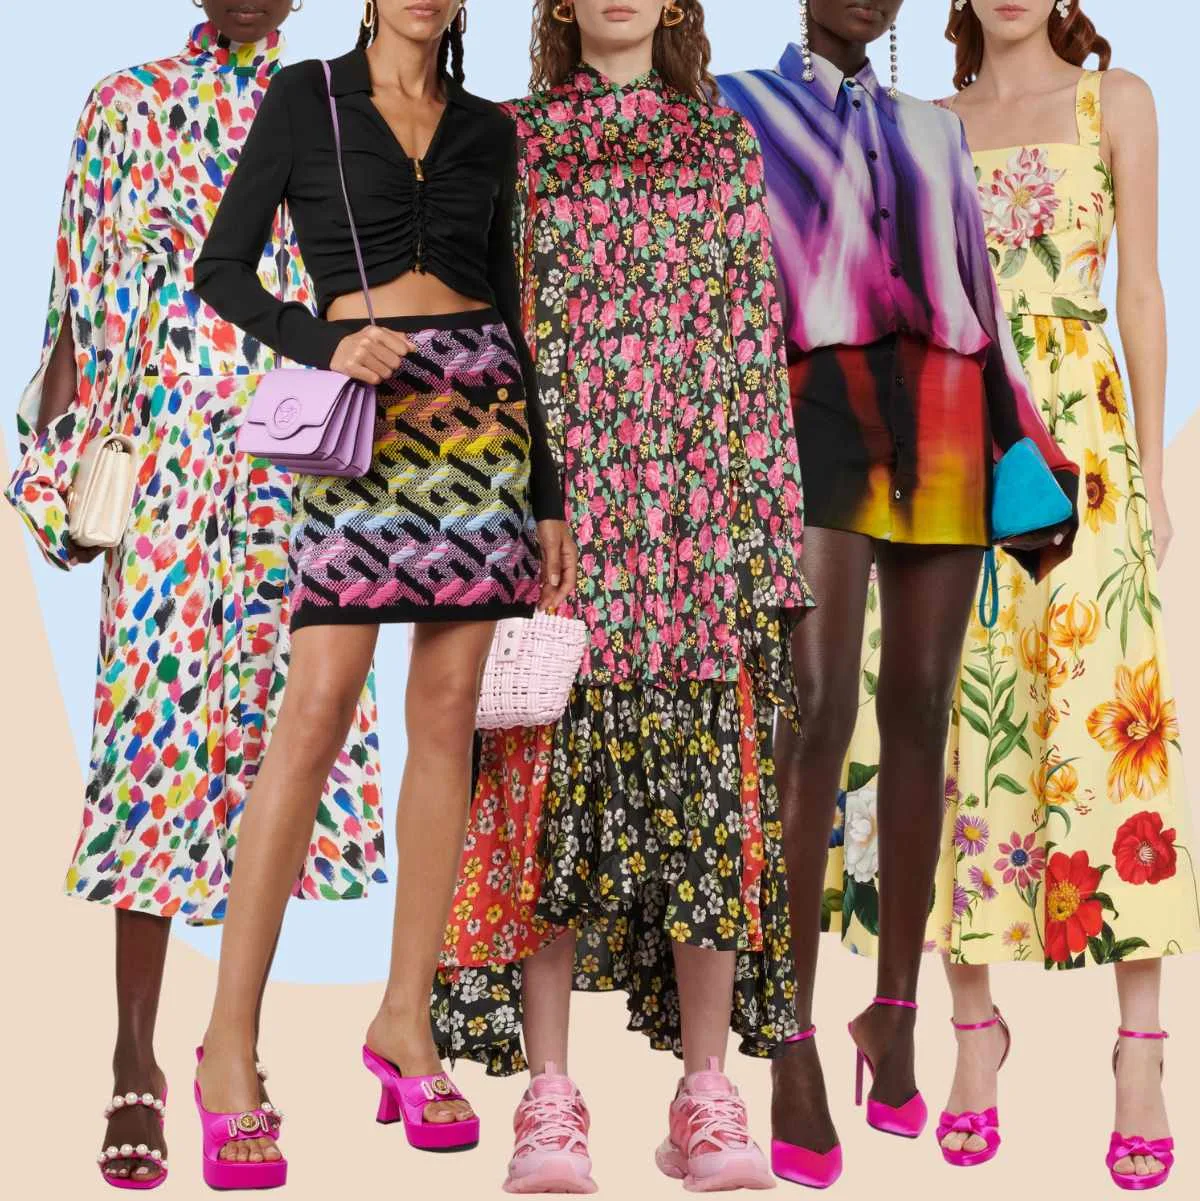 Collage of 5 women wearing Barbie core fashion shoes with colorful pattern outfits.